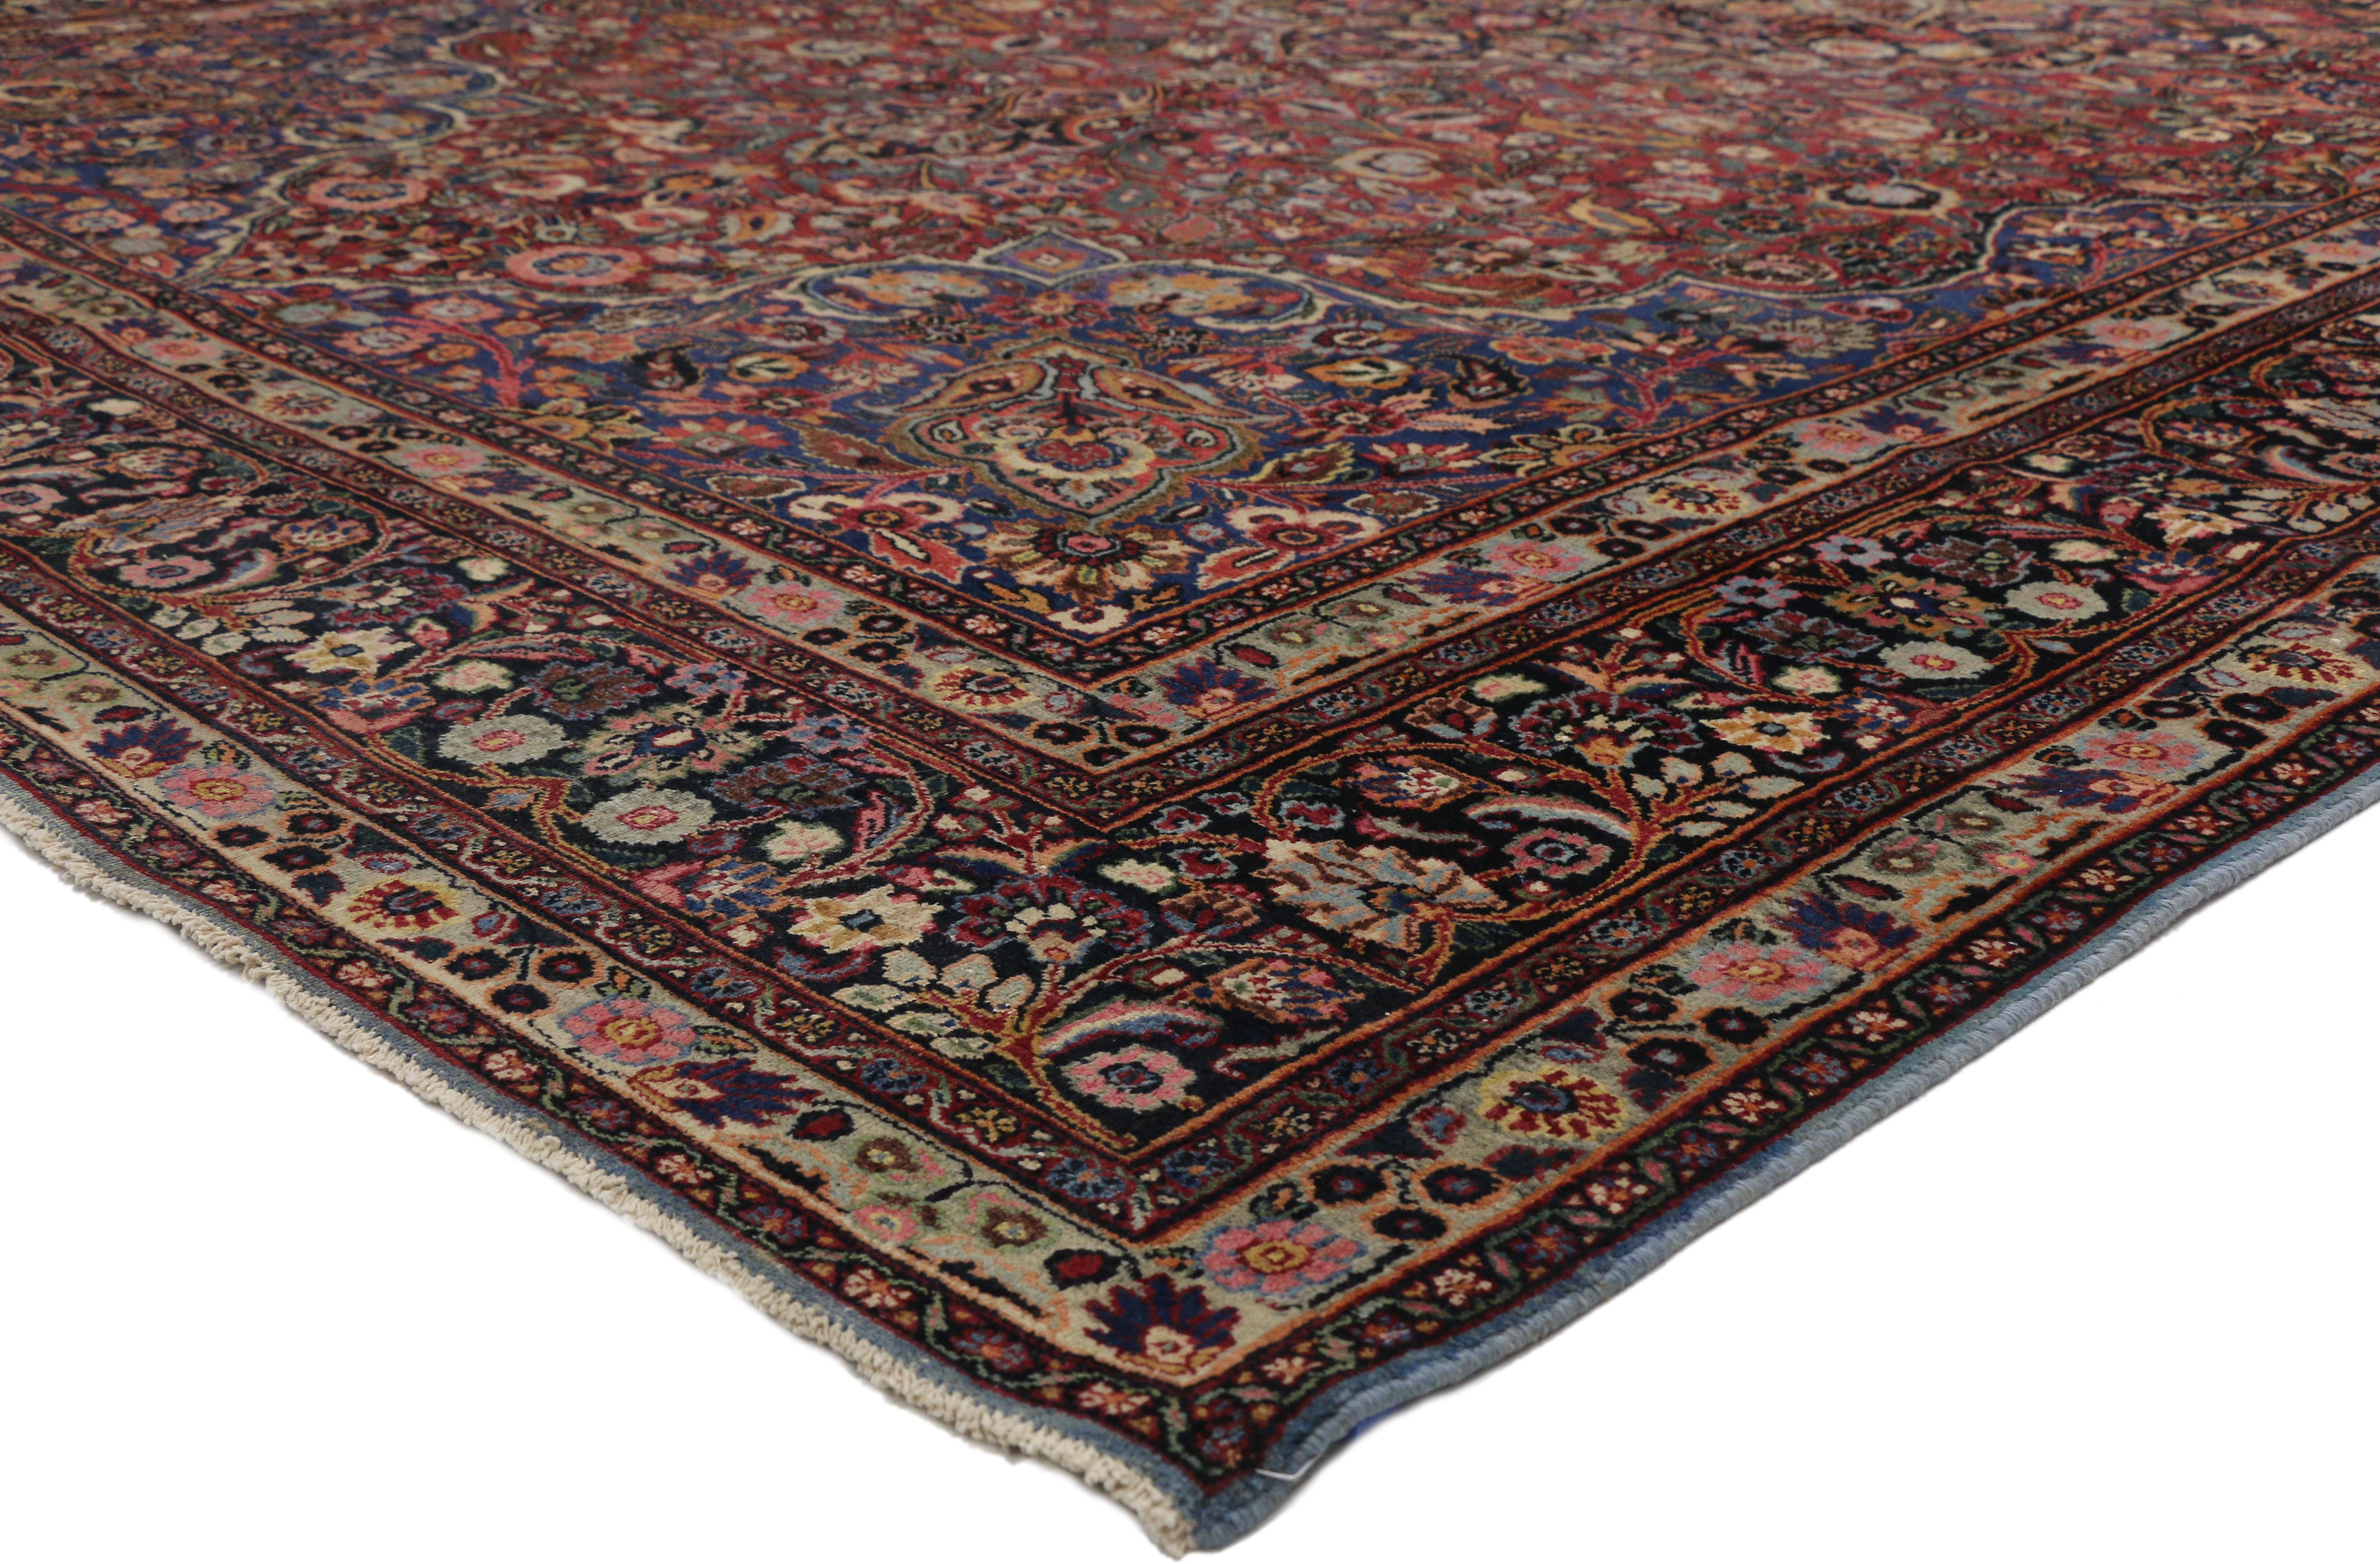 73733 Antique Persian Mashhad Rug, 10'05 x 17'02. Originating from the northeastern city of Mashhad in Iran, Mashhad rugs embody the pinnacle of artistic mastery and craftsmanship. Revered for their intricate designs and flawless execution, these